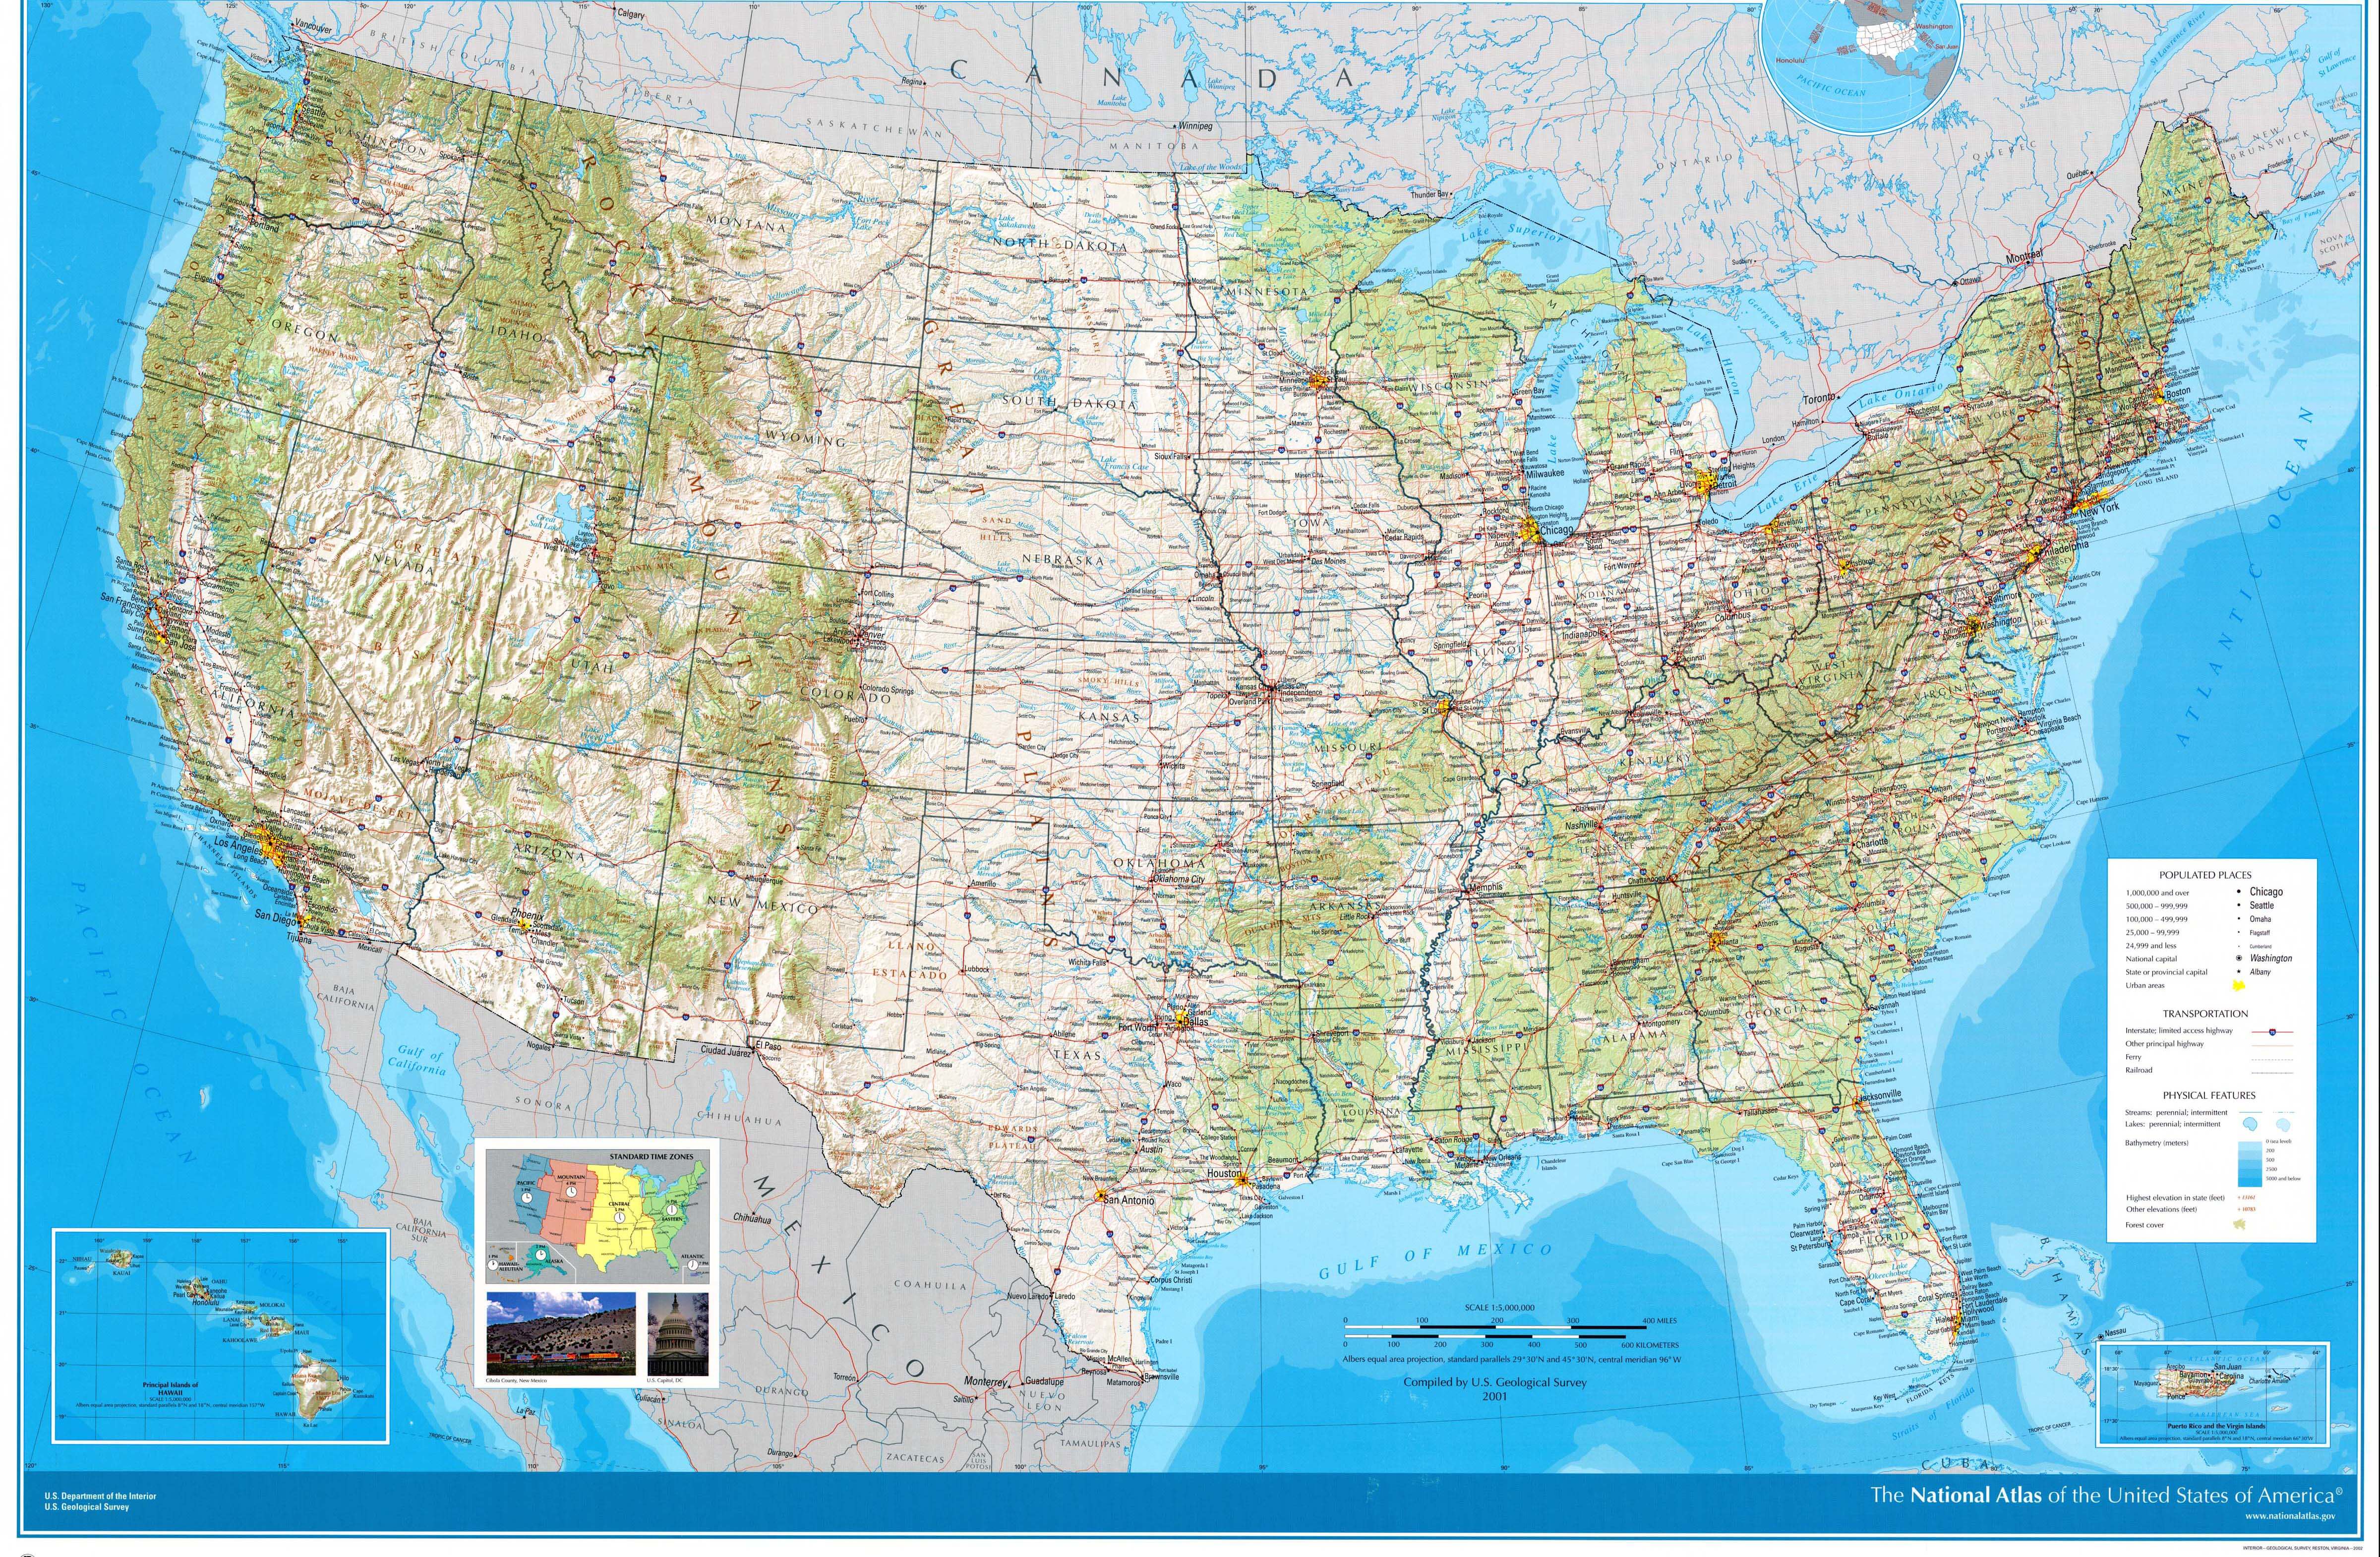 United States Wallpaper Map - United States Map - HD Wallpaper 